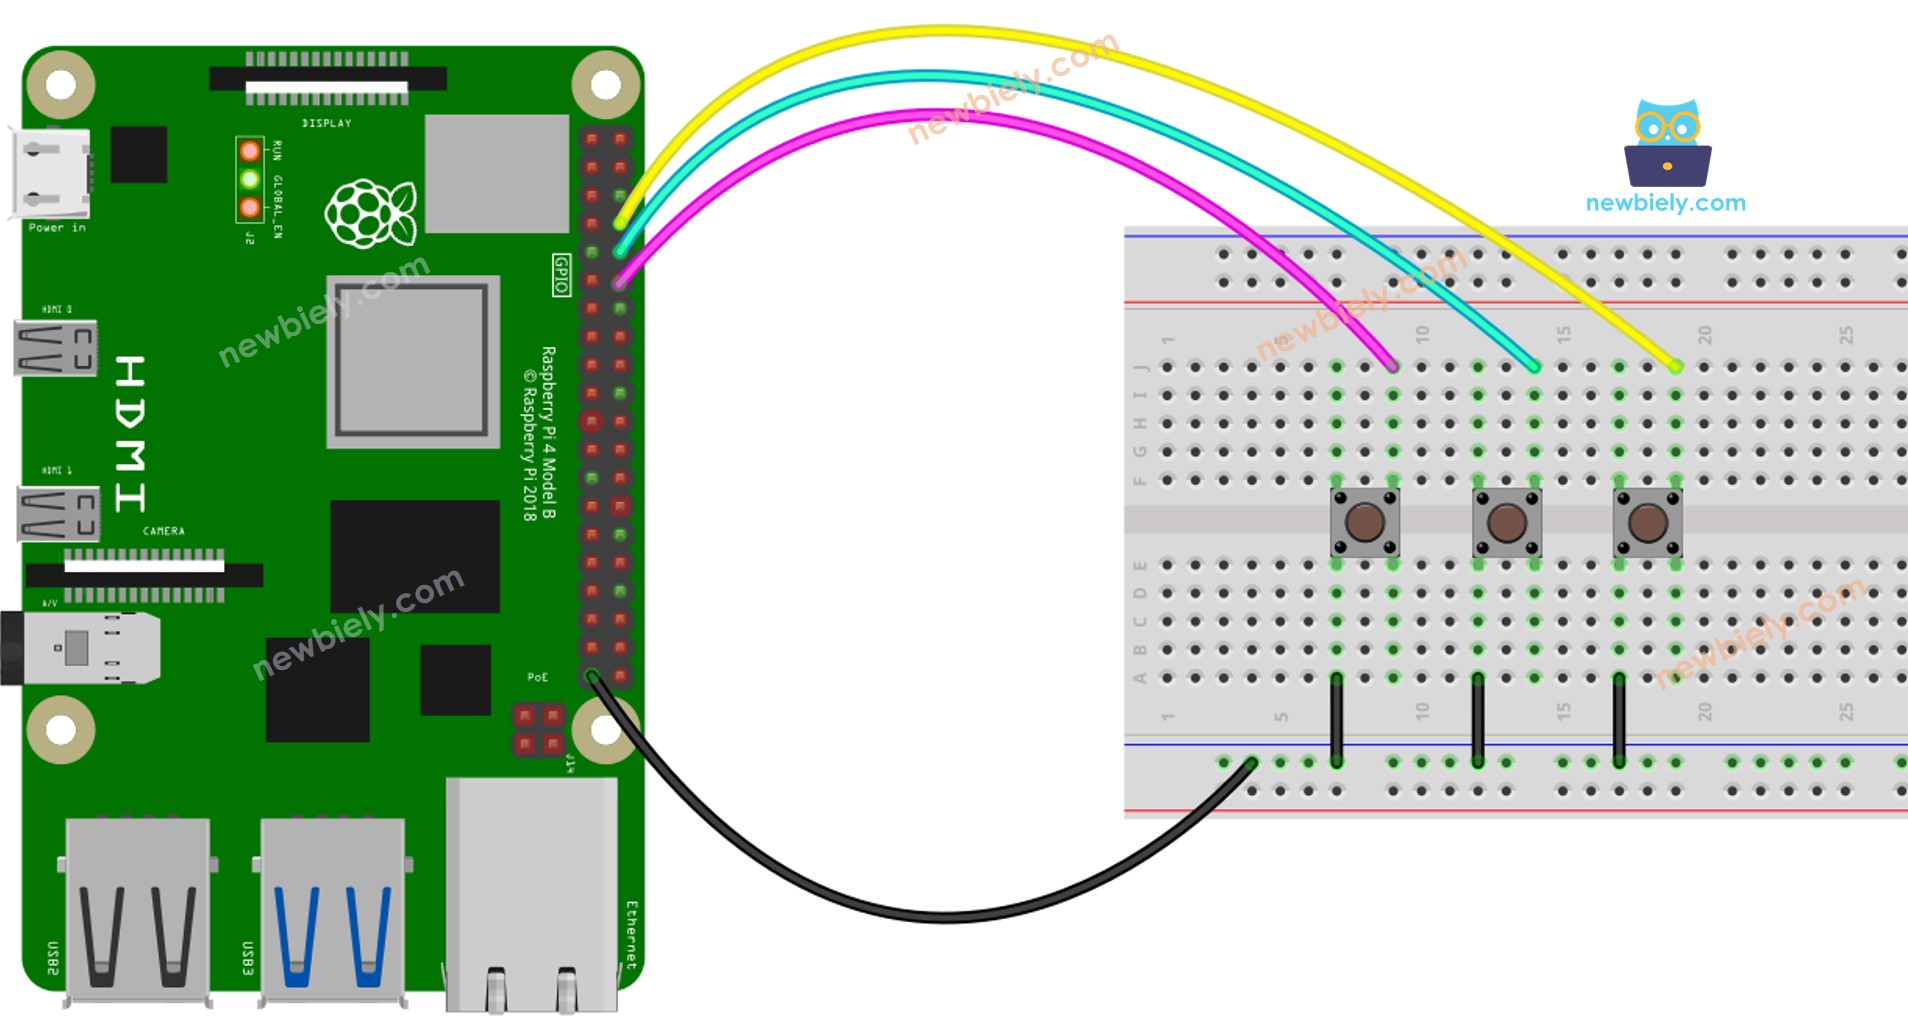 The wiring diagram between Raspberry Pi and Button Library